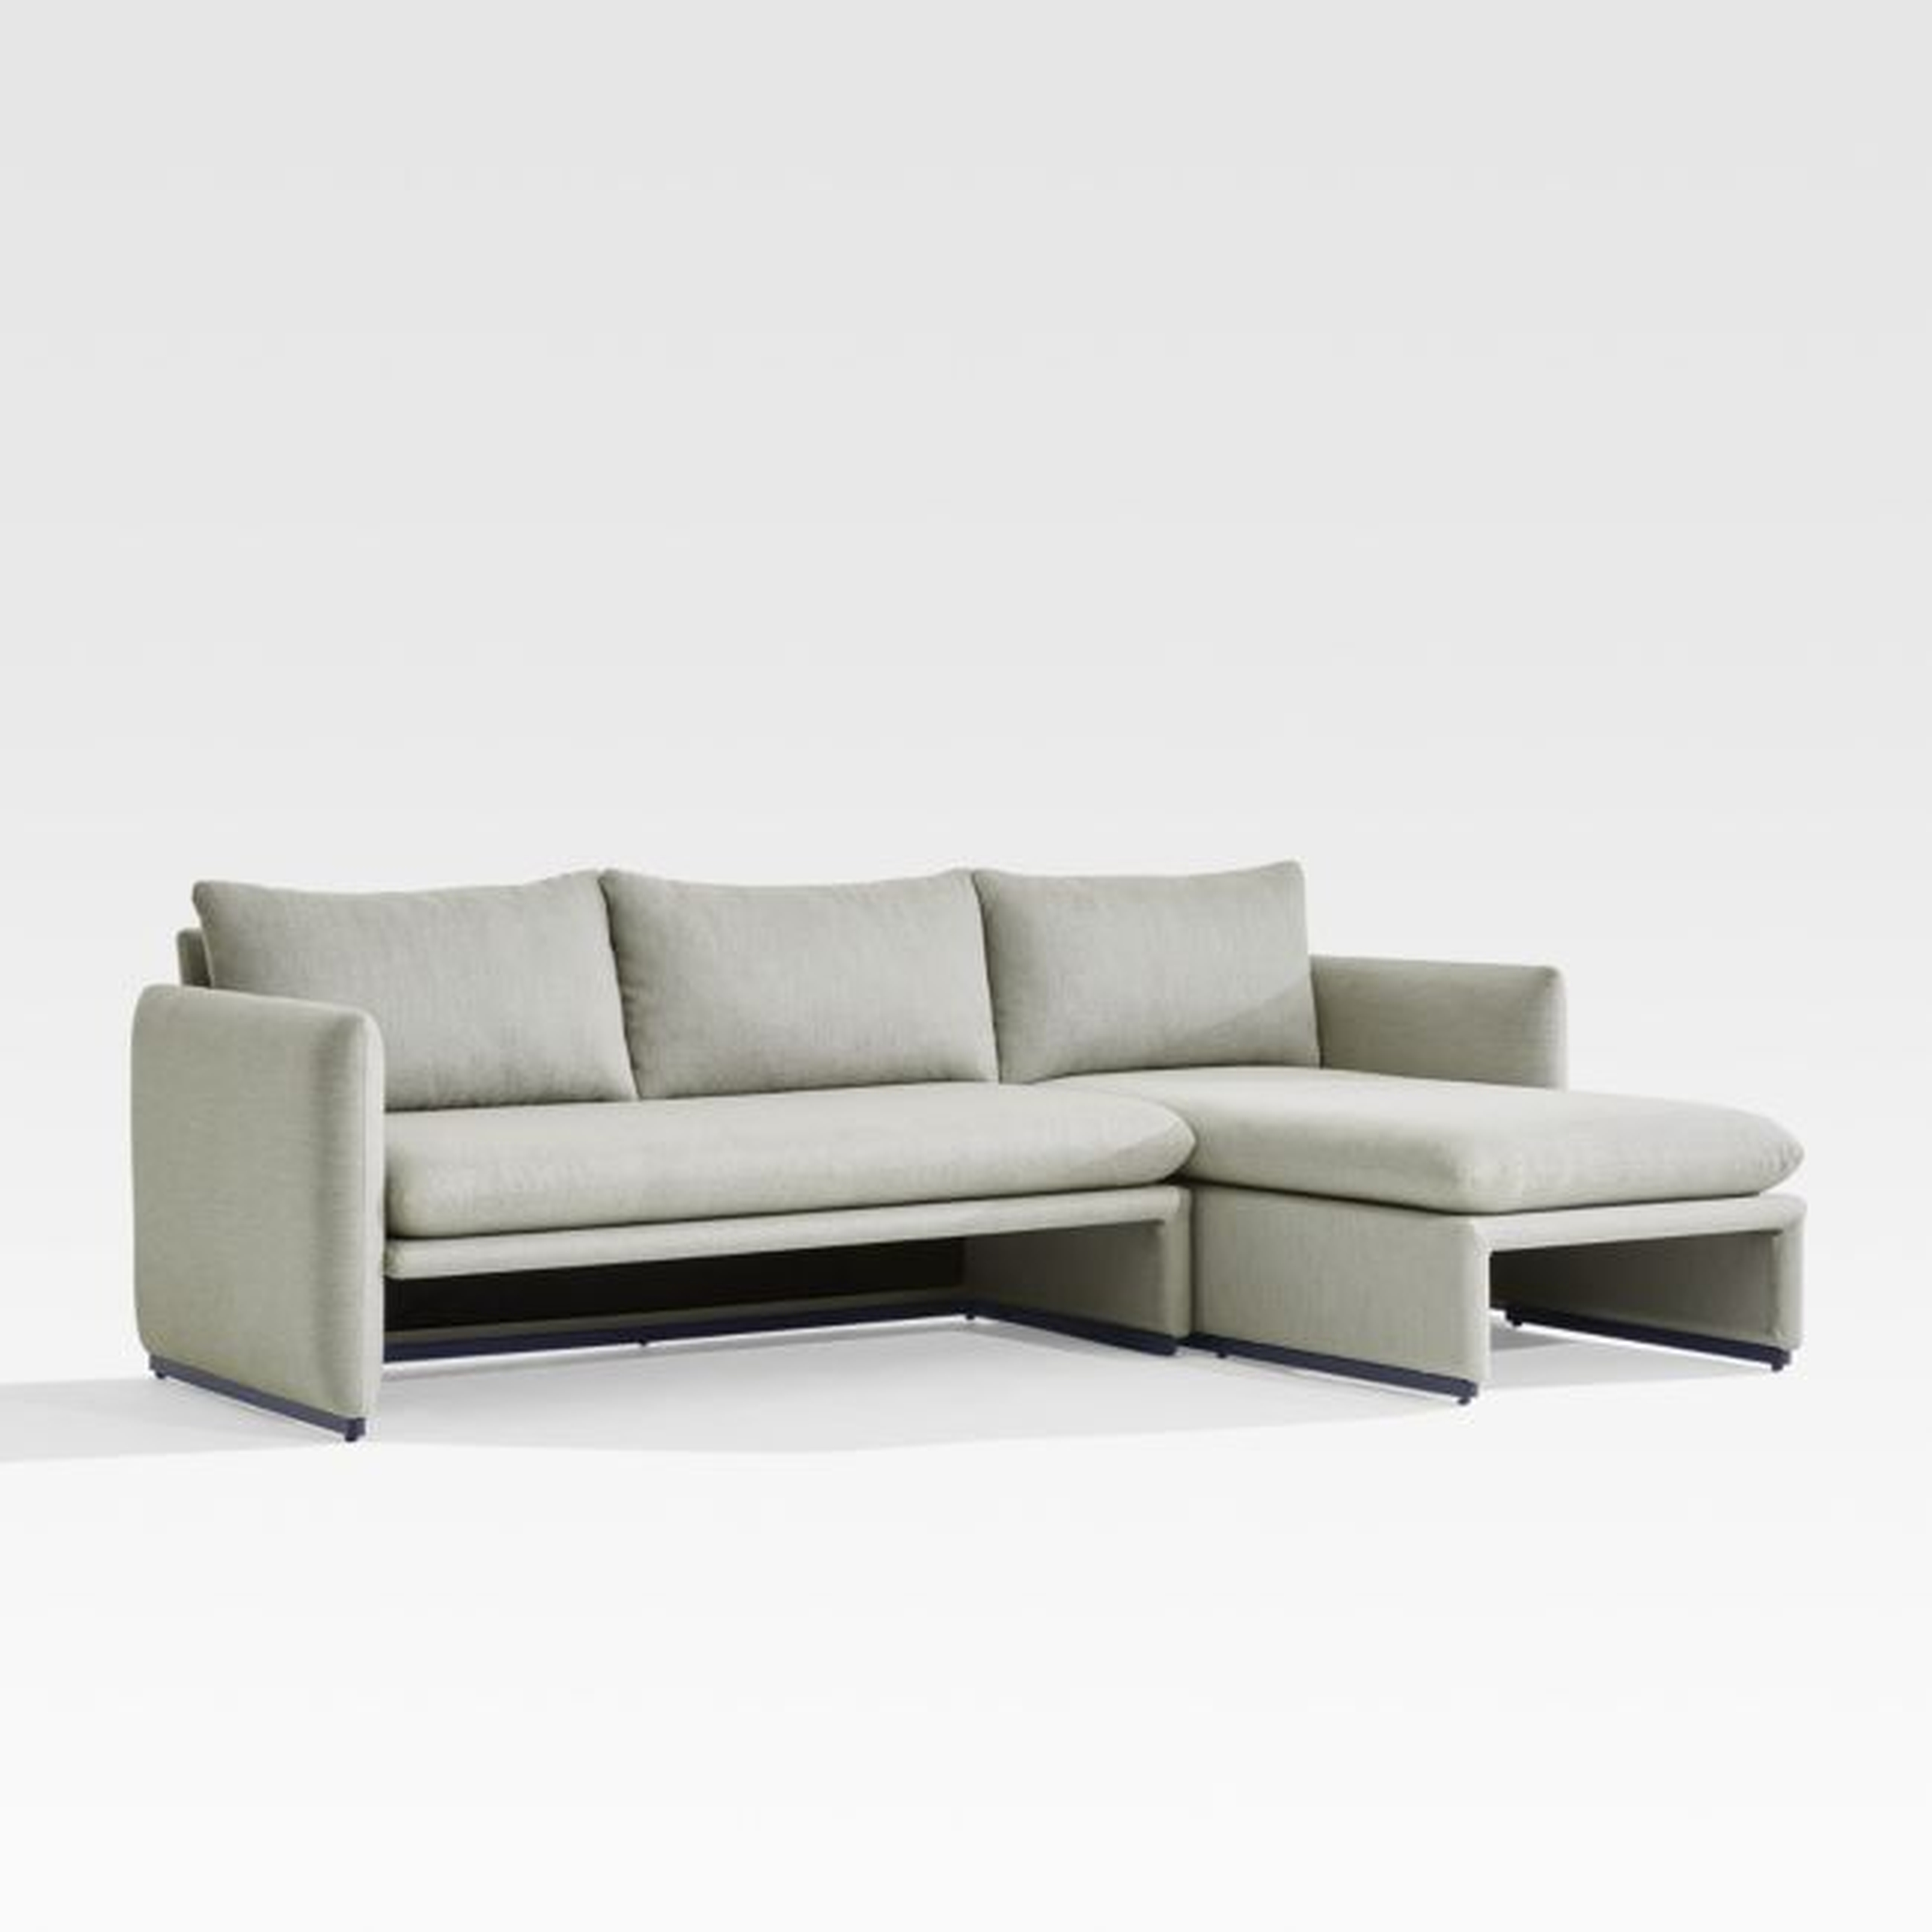 Zuma Outdoor Upholstered 2-Piece Sectional with Left-Arm Loveseat - Crate and Barrel